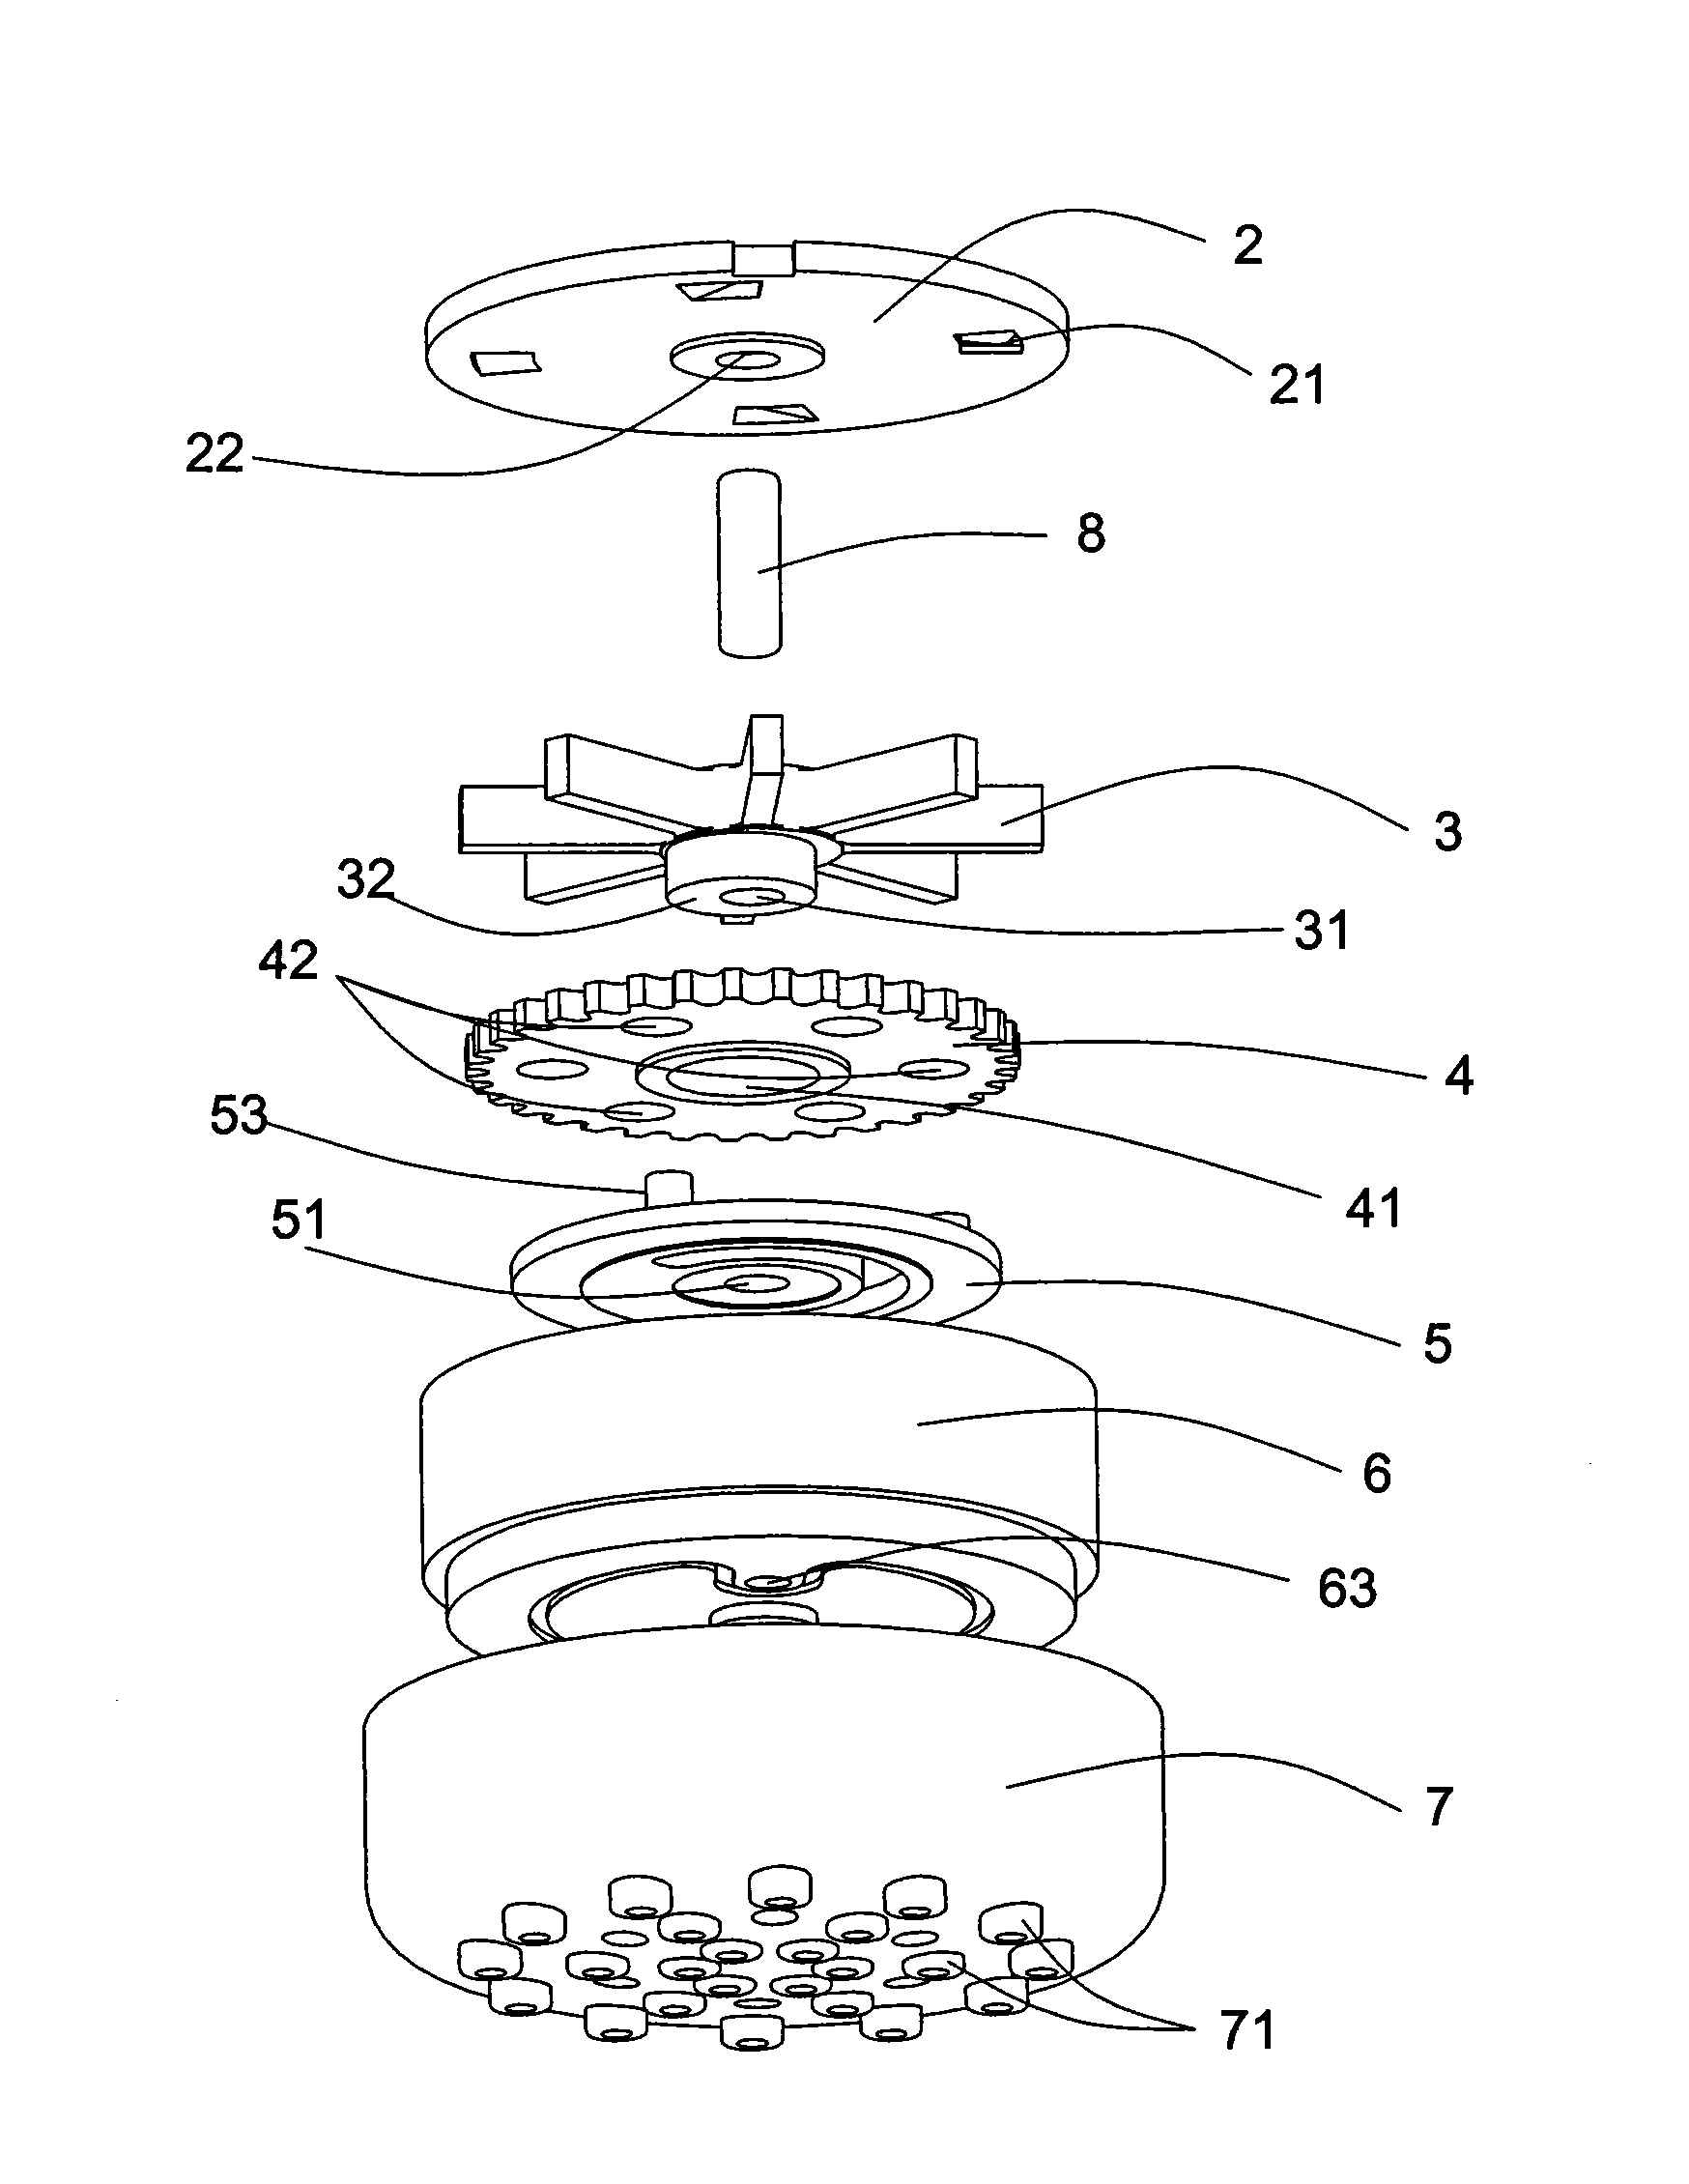 Massage shower head capable of realizing water flow dynamic switching